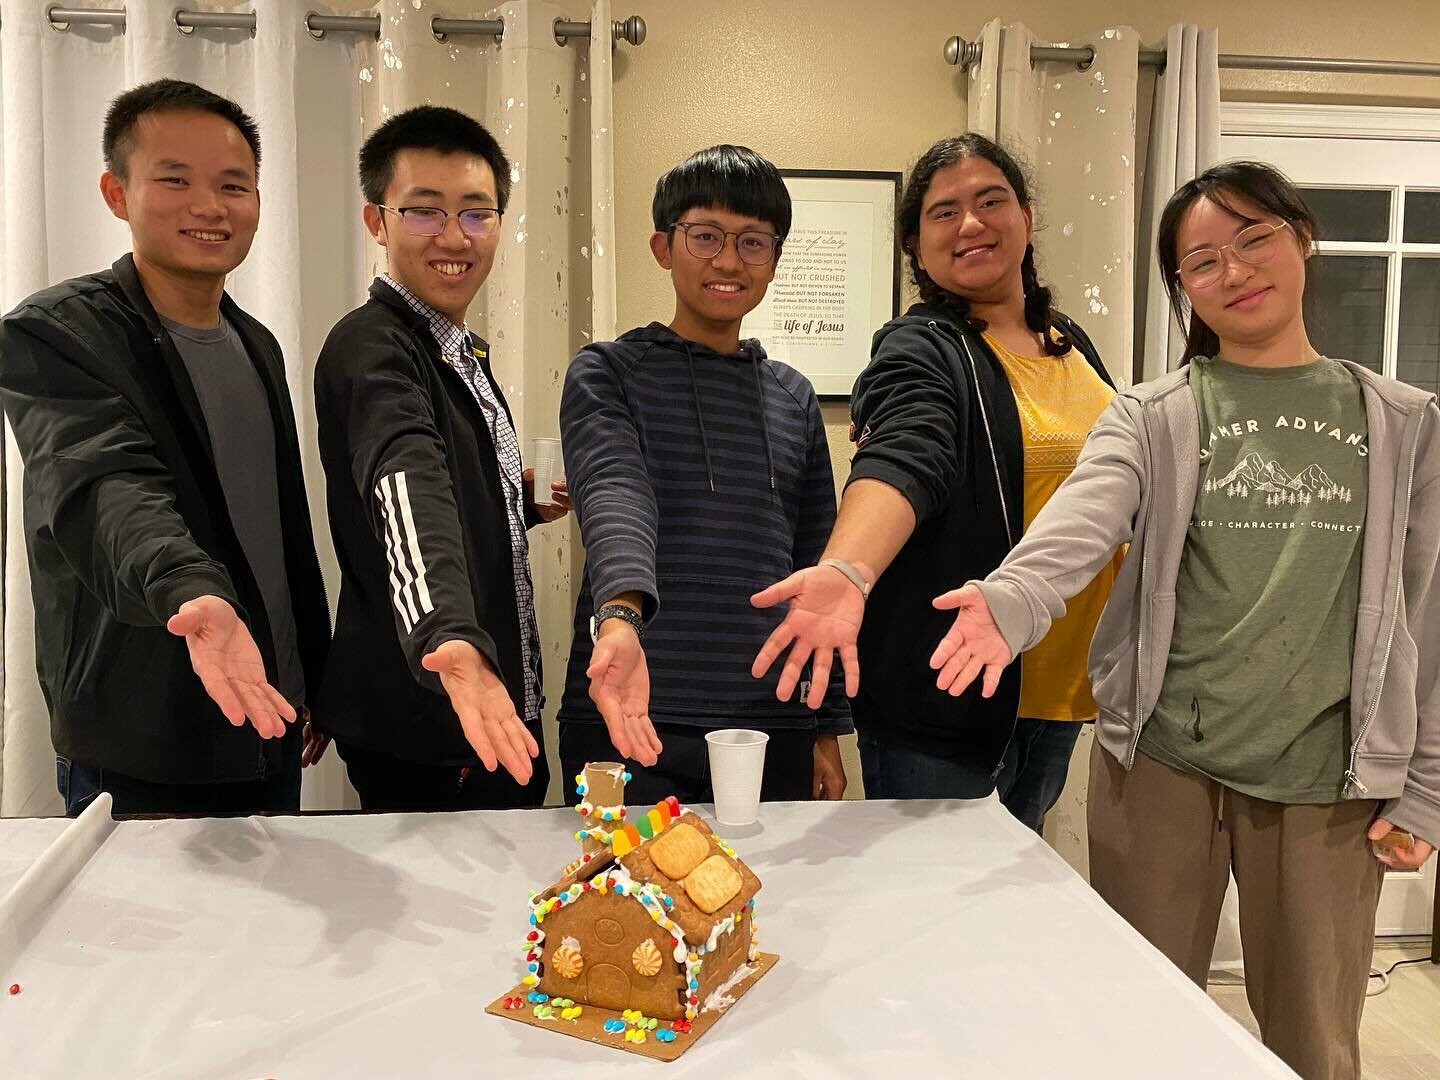 Cheers to our winning team in our gingerbread decorating competition 🙌 

We celebrated the end of finals with a gingerbread house making competition 🍭🏚️🍭. Teams were creative as they tried to make houses that represented UCI, Irvine, and Jay/Cath